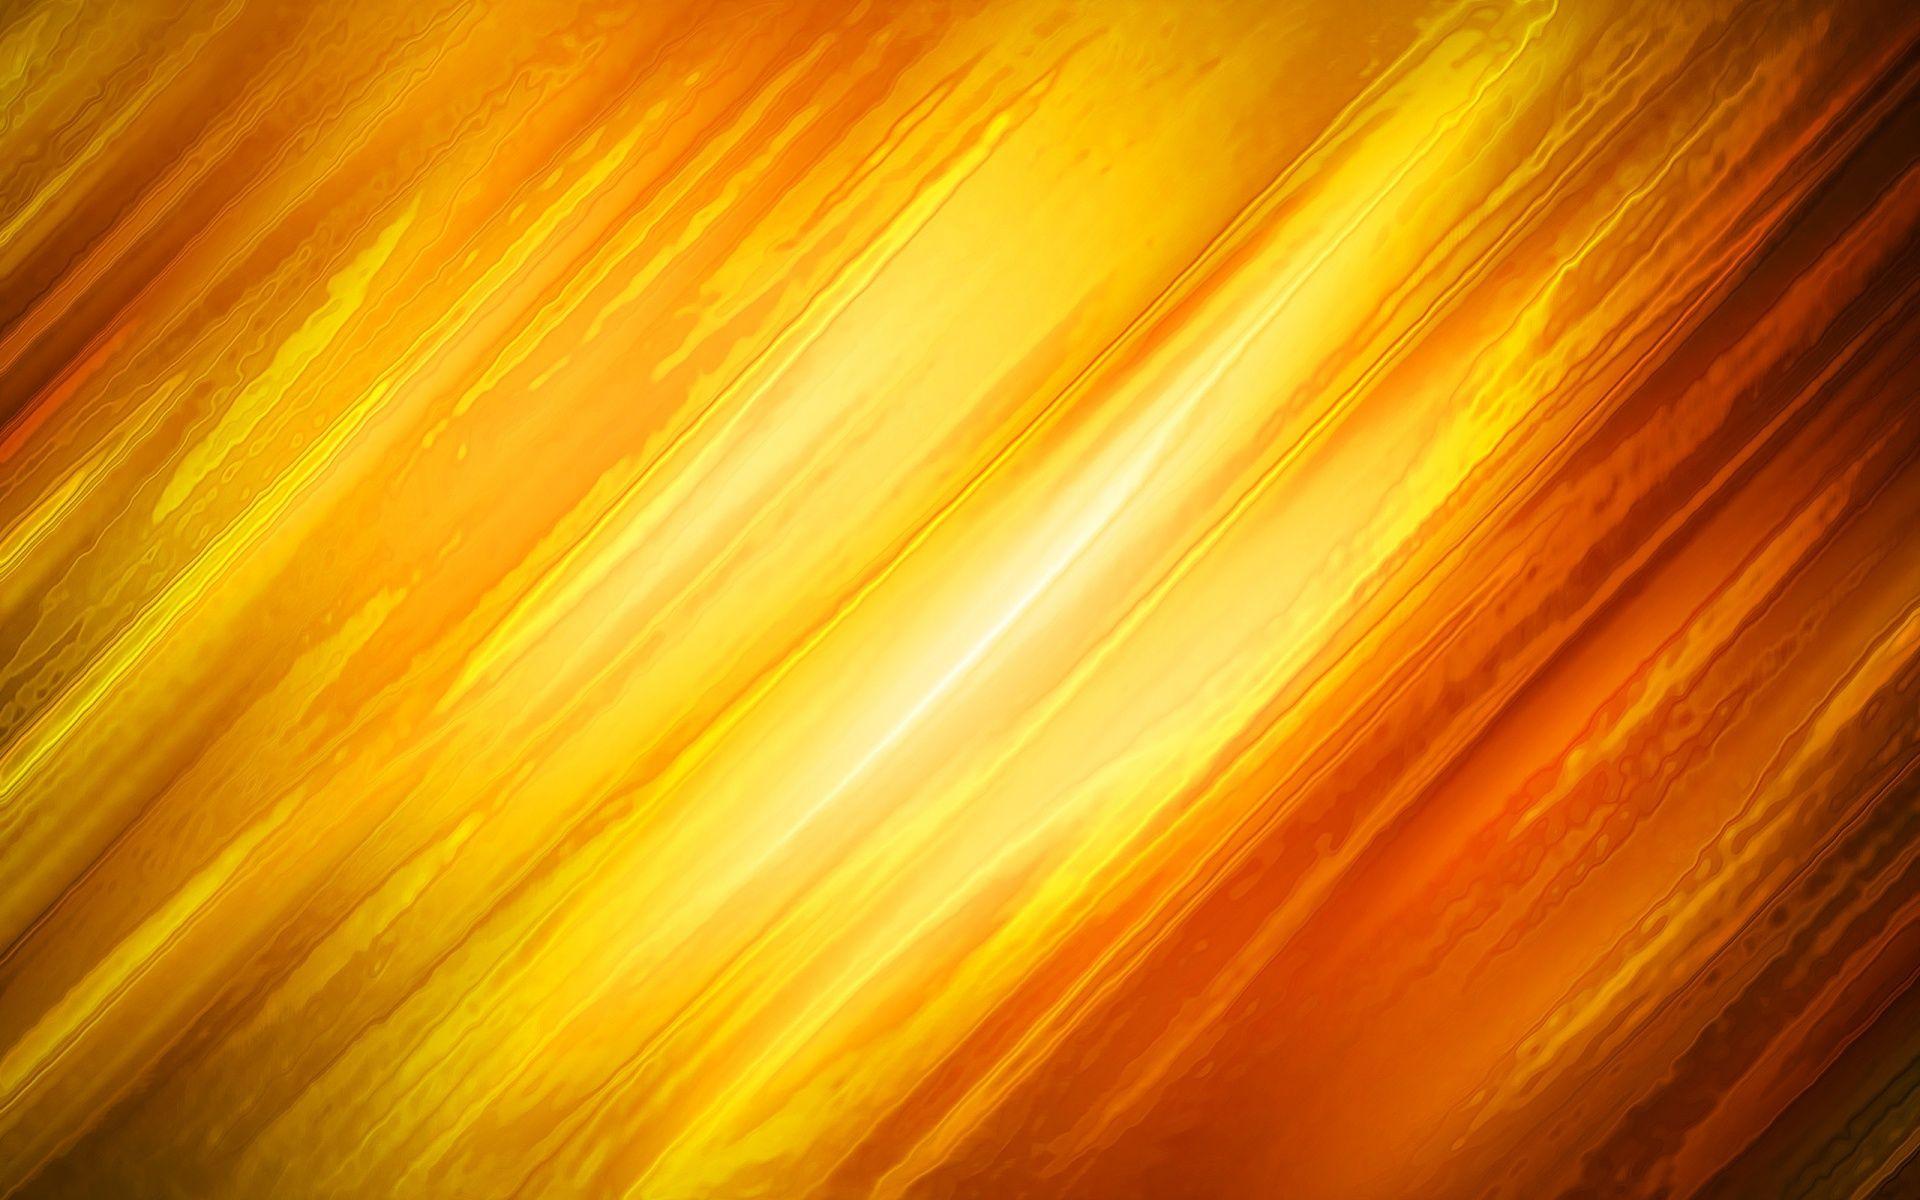 Abstract Yellow And Orange Background Wallpaper_35310_